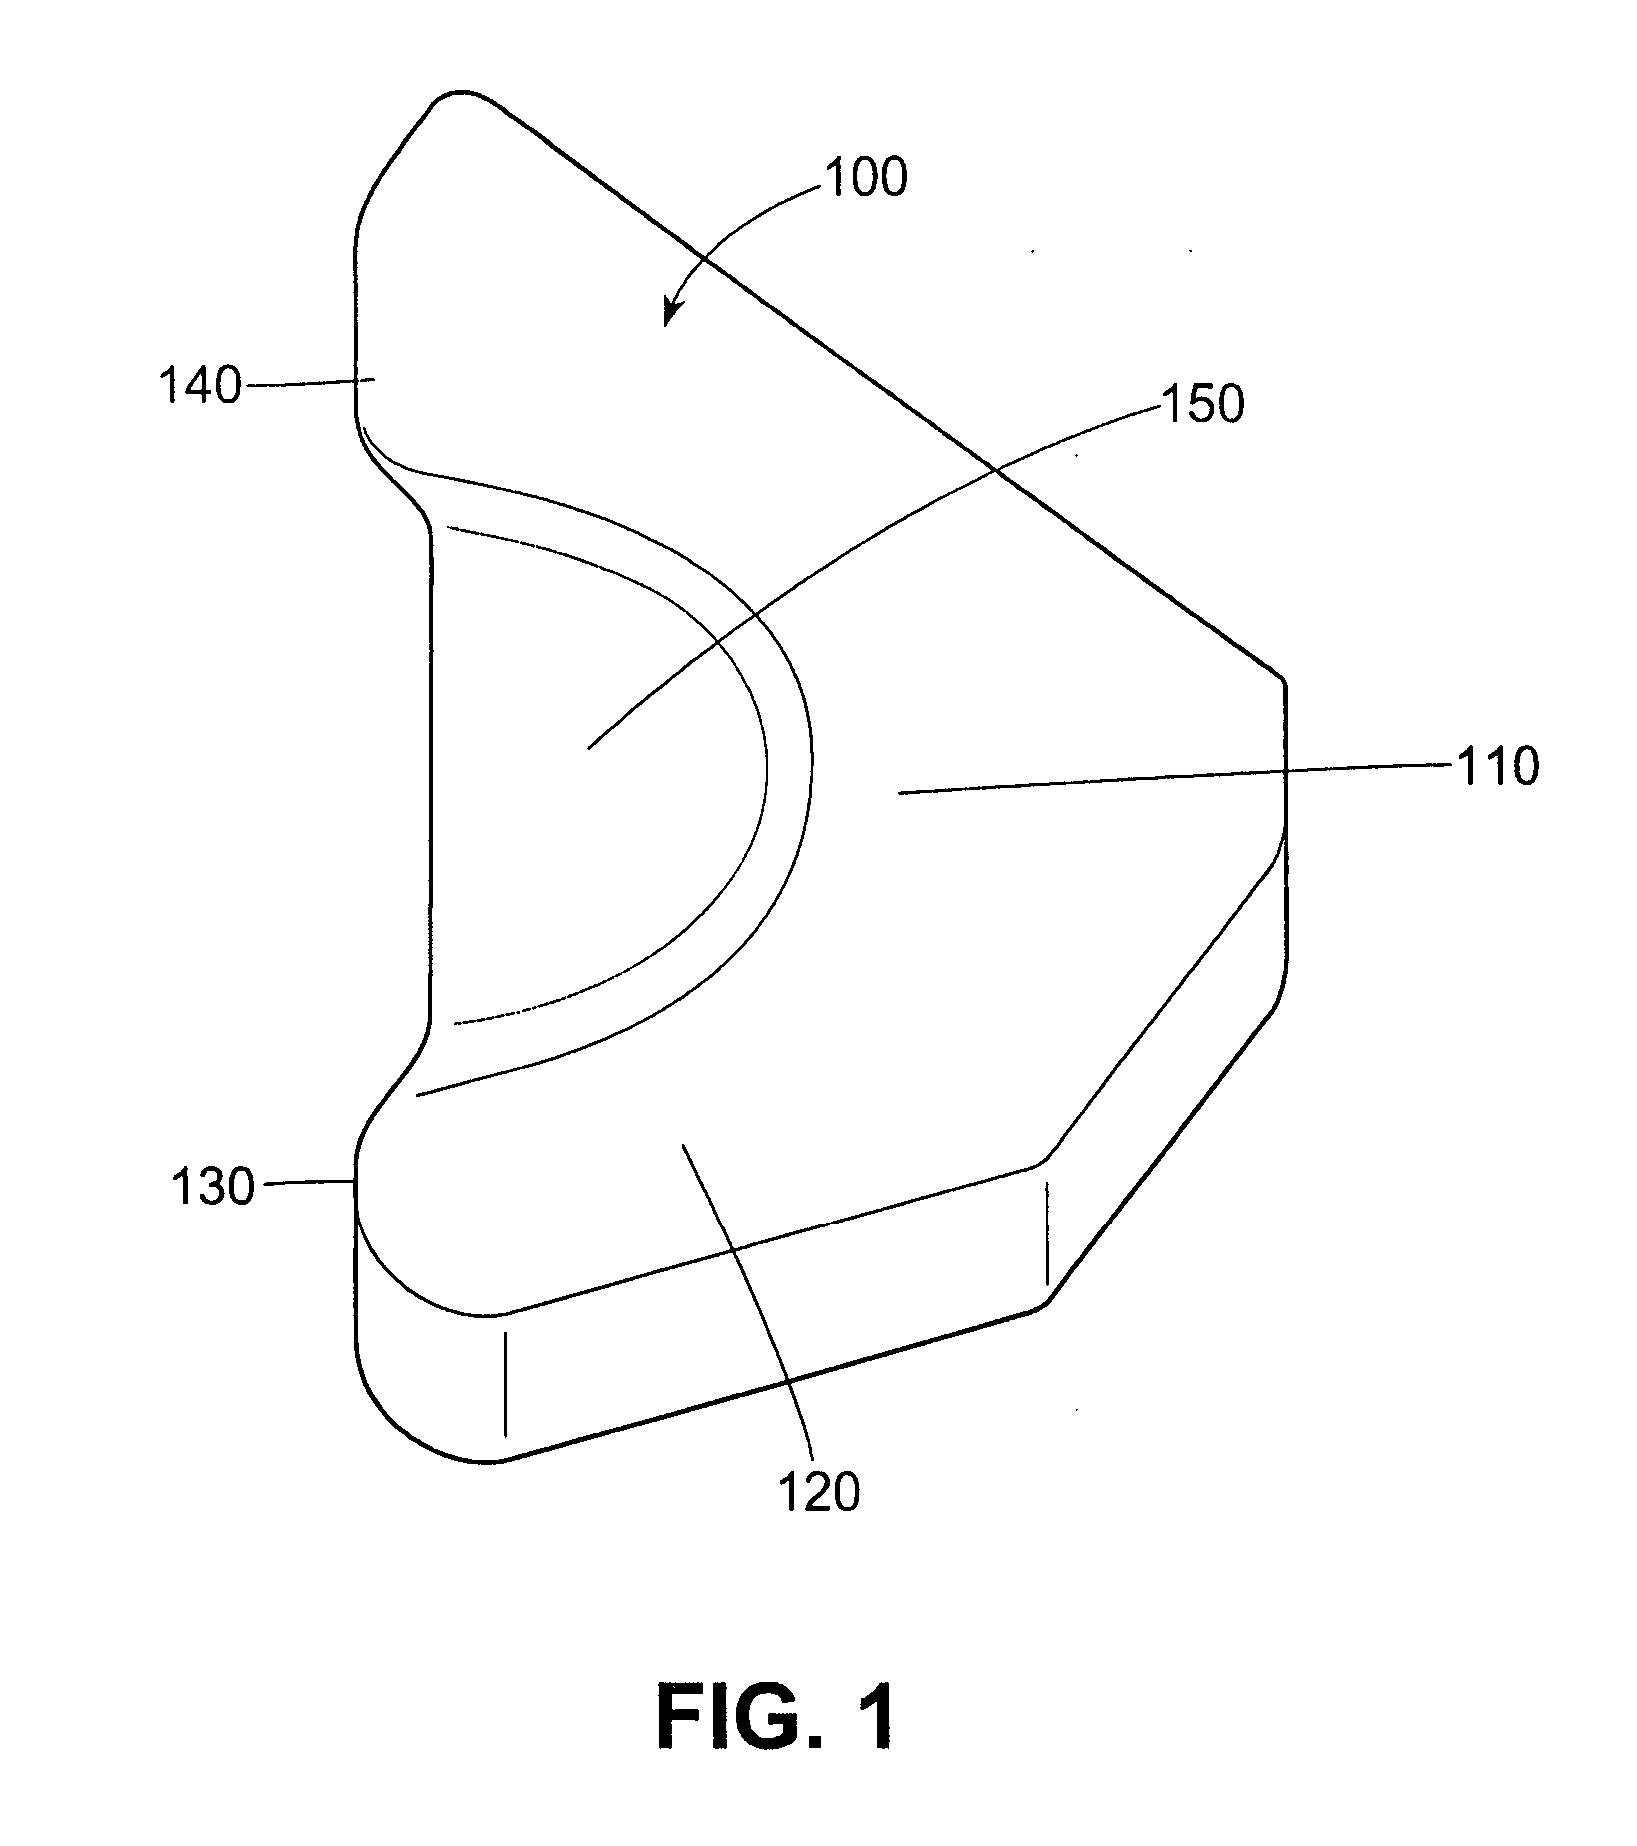 Method for alleviating or diverting pressure, treating or preventing the formation of sleep lines or decreasing their rate of formation, decreasing the rate of scar formation or facilitating the overall healing of a target area of a subjects's body